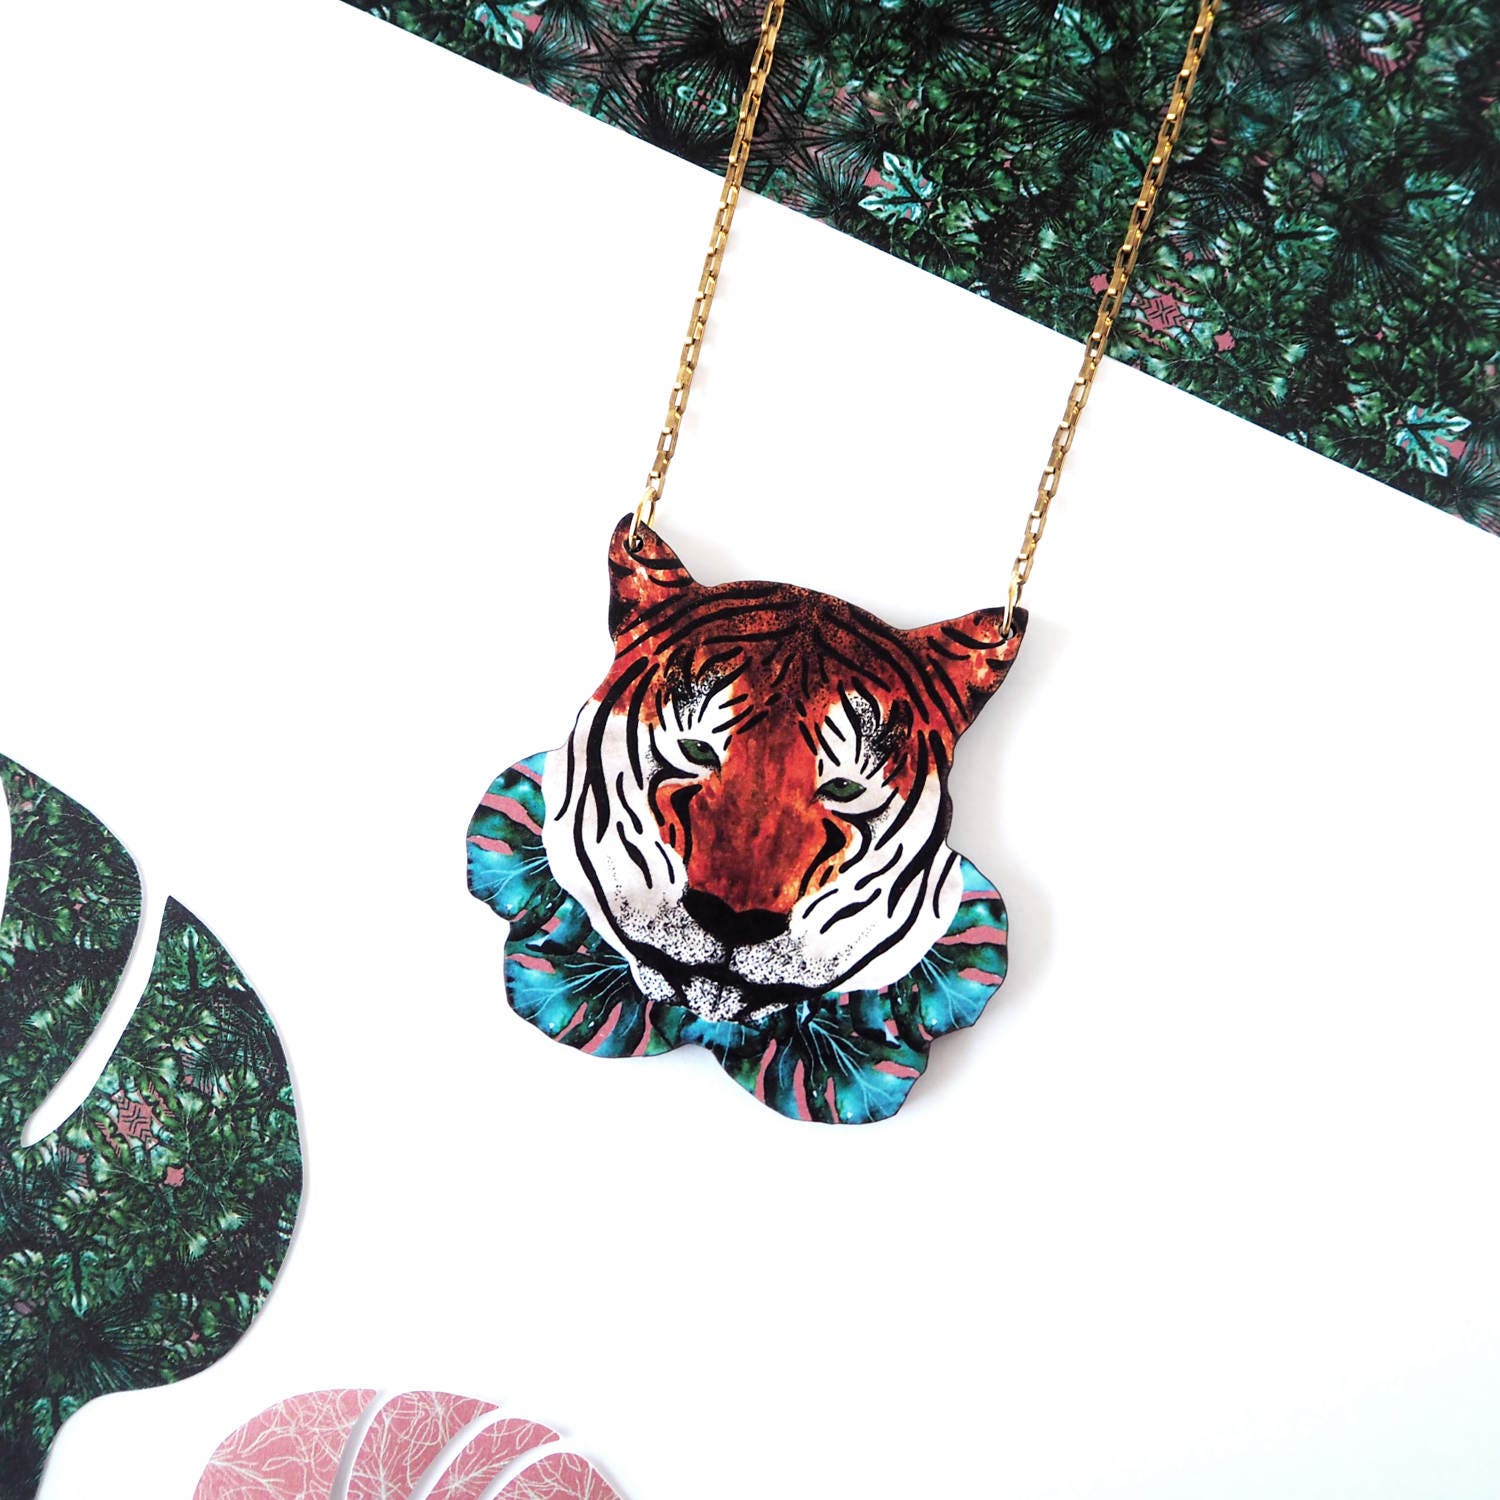 Tiger Necklace - Stocking Fillers Xmas Gift For Sister/Her Jungle Tropical Jewellery Animal